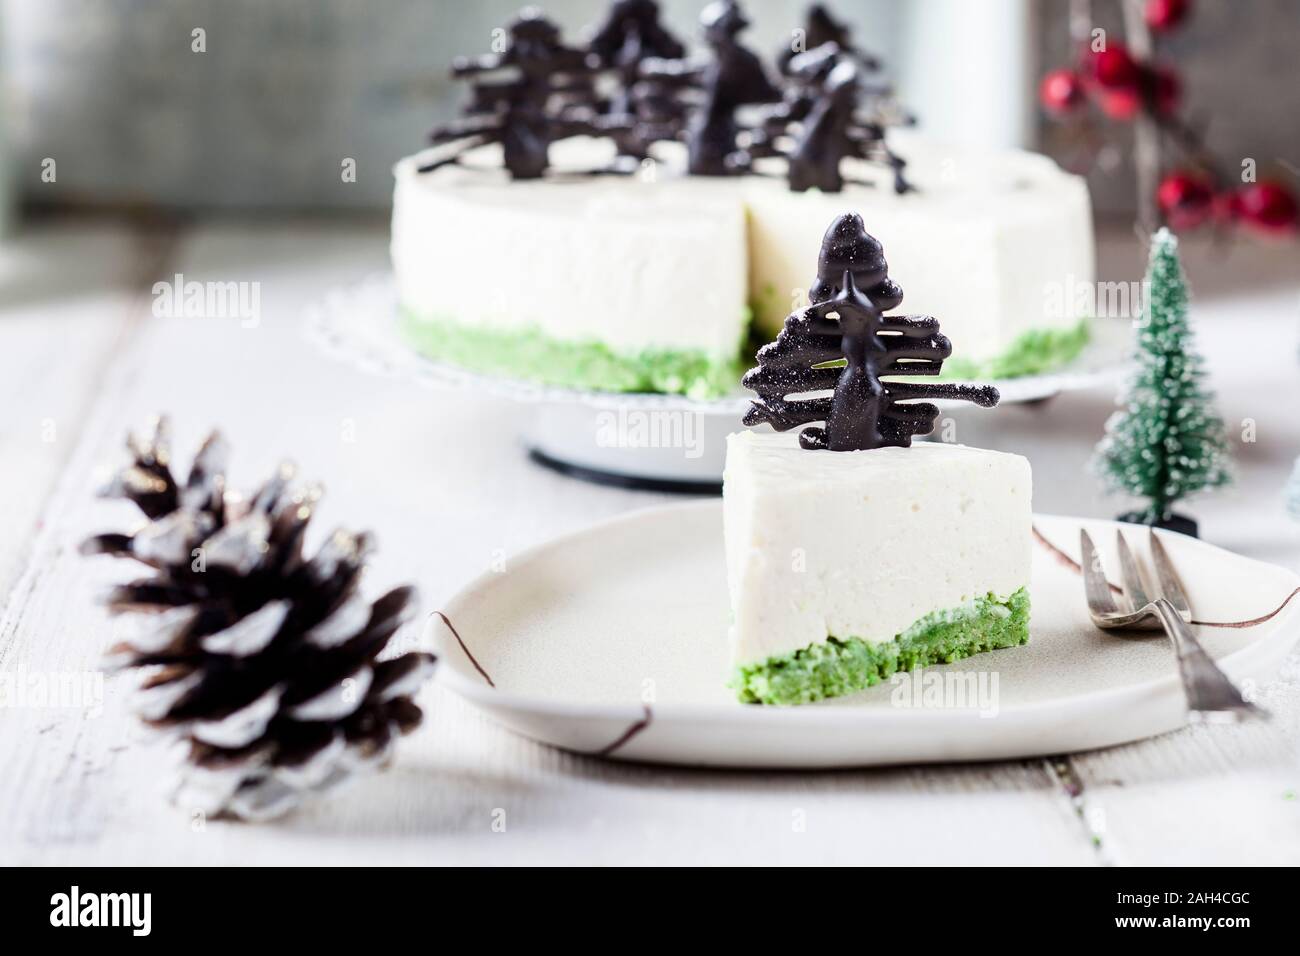 Piece of no-bake cheesecake, decorated with chocolate Christmas trees on plate Stock Photo